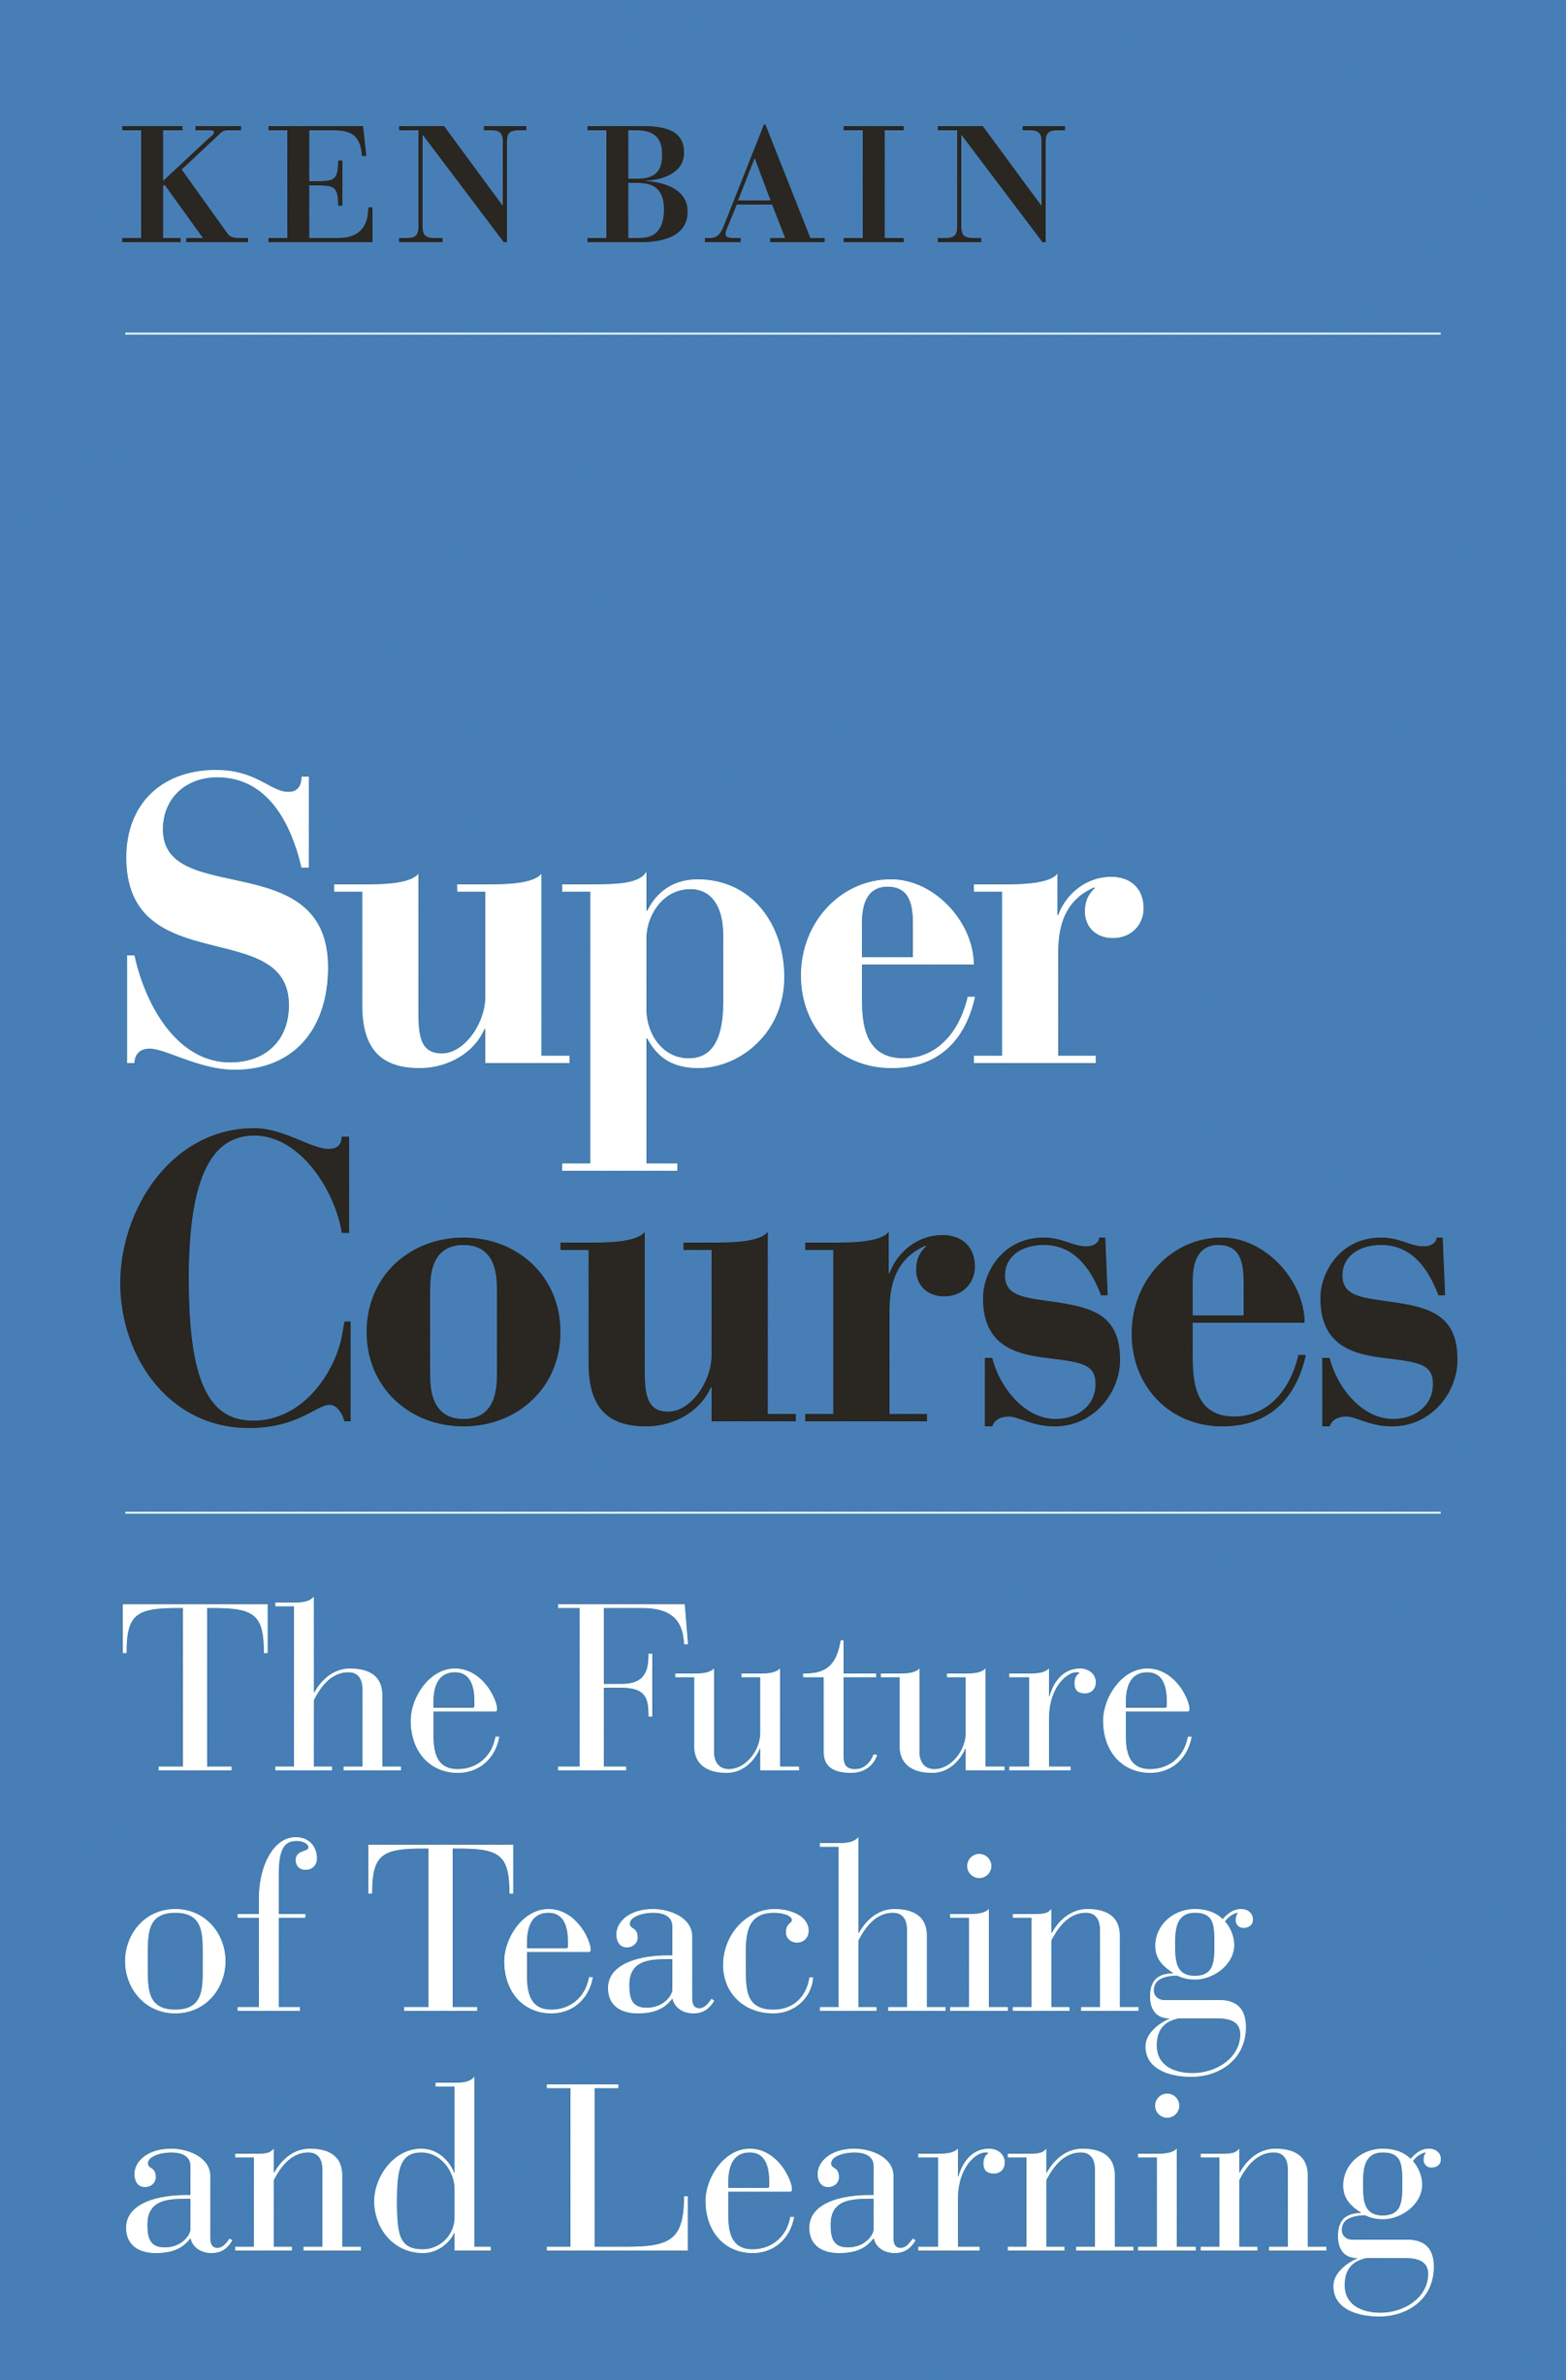 SUPER COURSES SUPER COURSES The Future of Teaching and Learning Ken Bain - photo 1